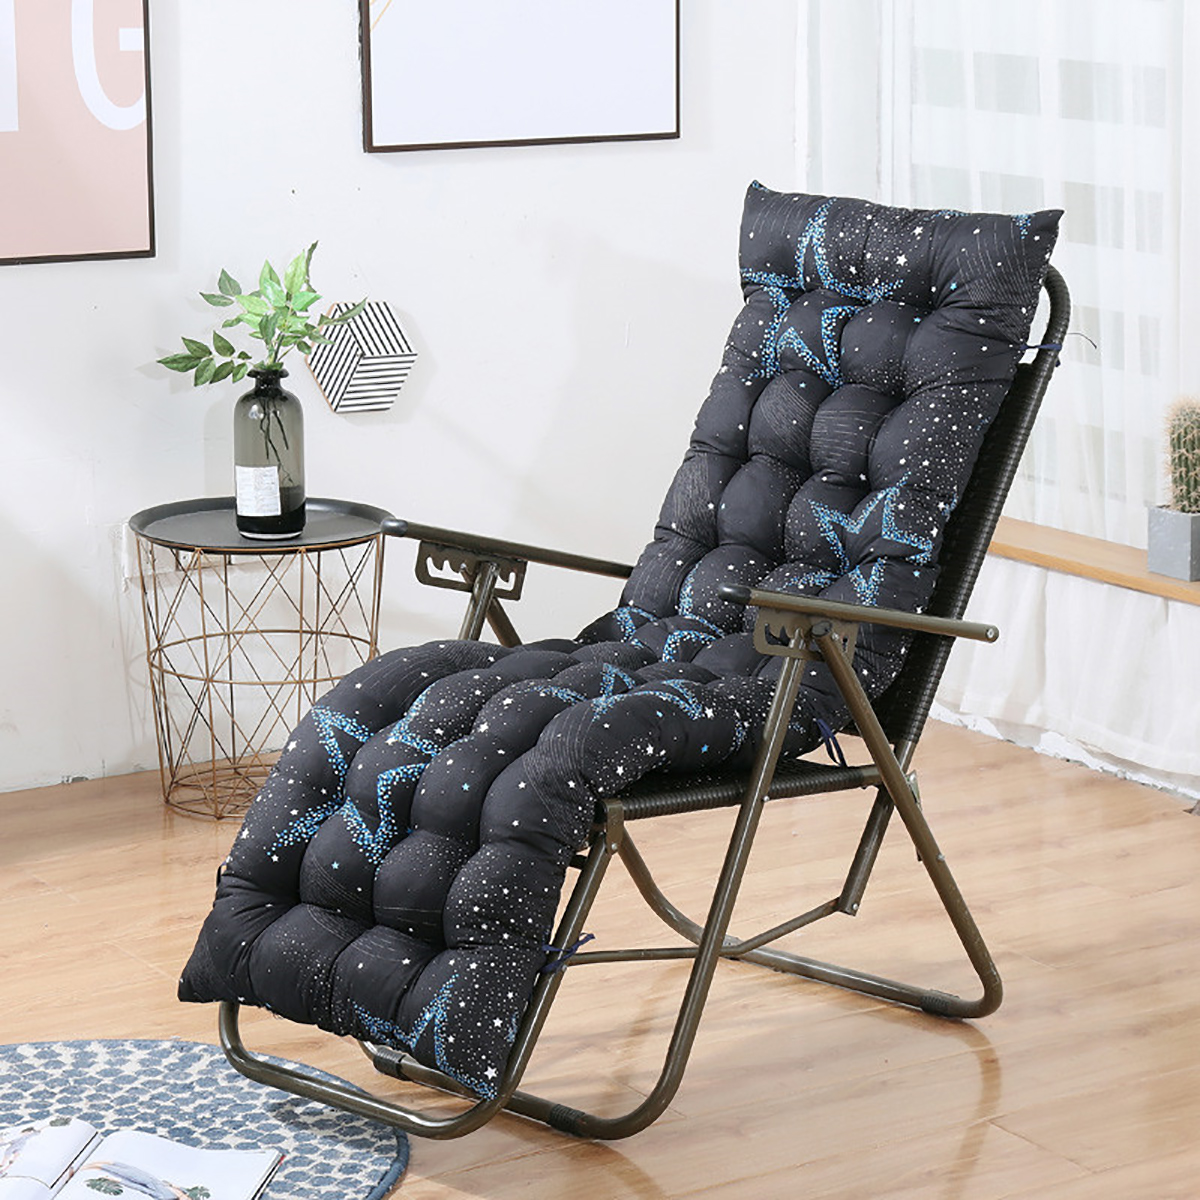 YEERSWAG Deck Lounge Chair Patio Cushion Cover Seat Pad Recliner Furnitur